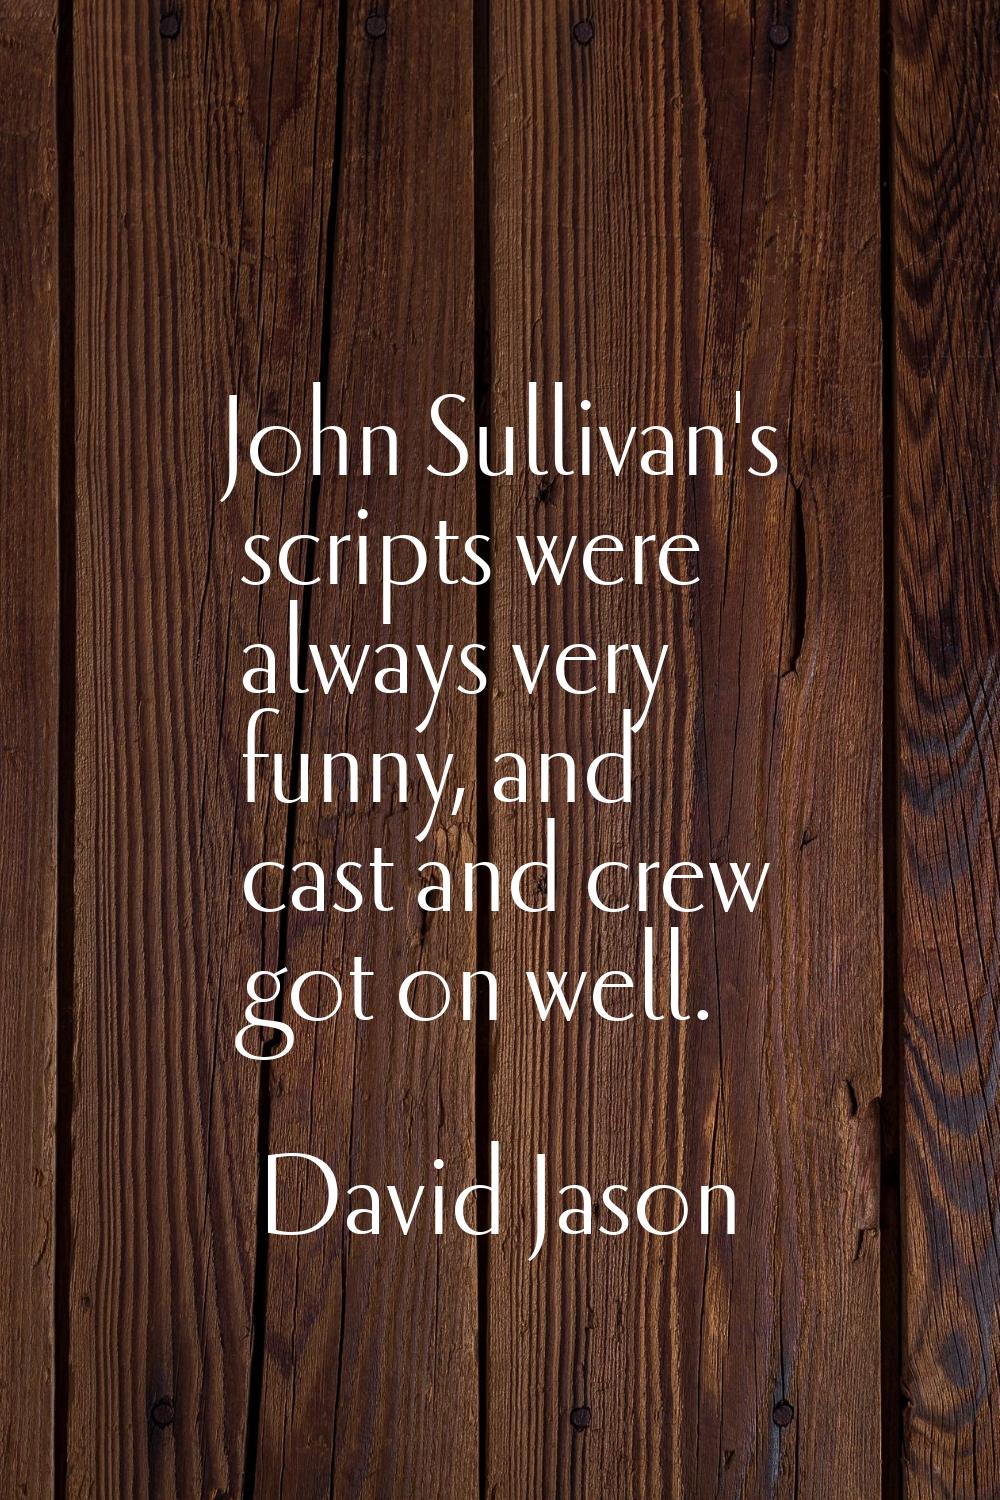 John Sullivan's scripts were always very funny, and cast and crew got on well.